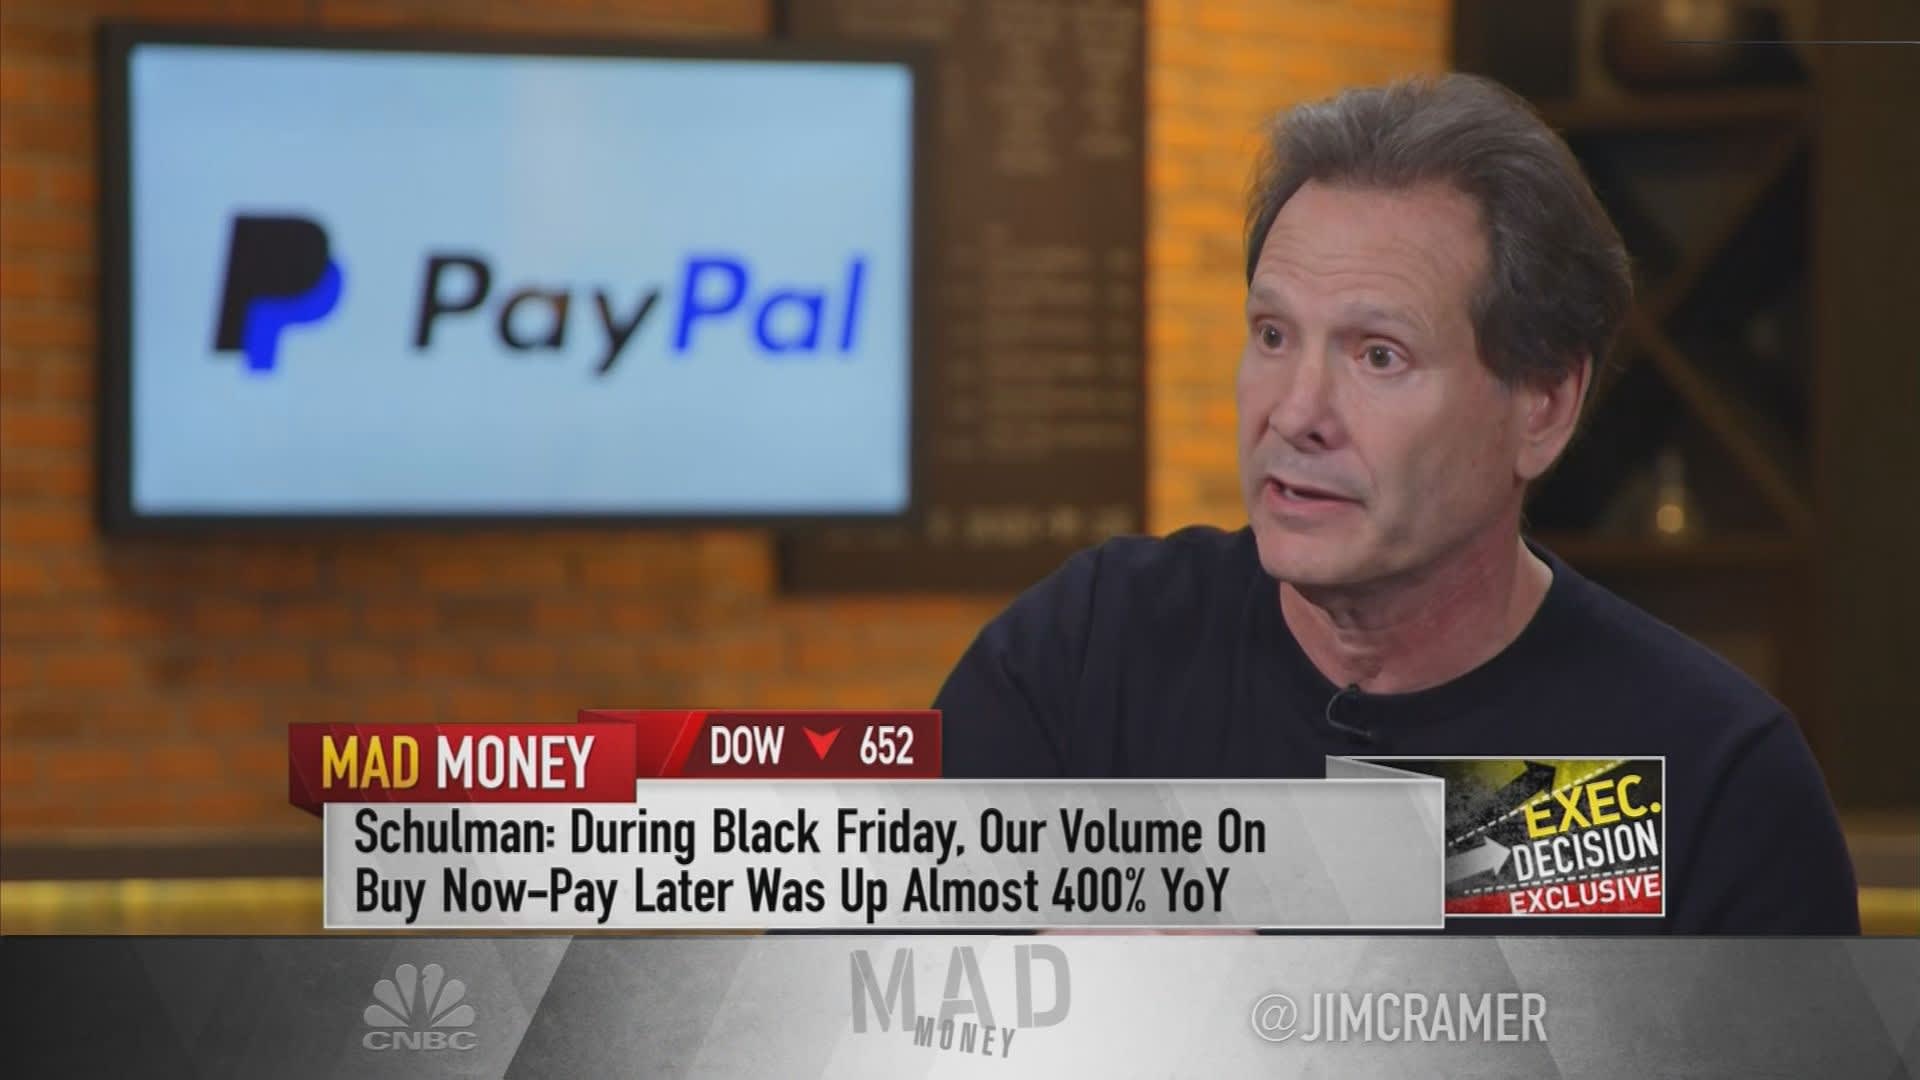 PayPal CEO says use of ‘buy now, pay later’ option soared nearly 400% on Black Friday